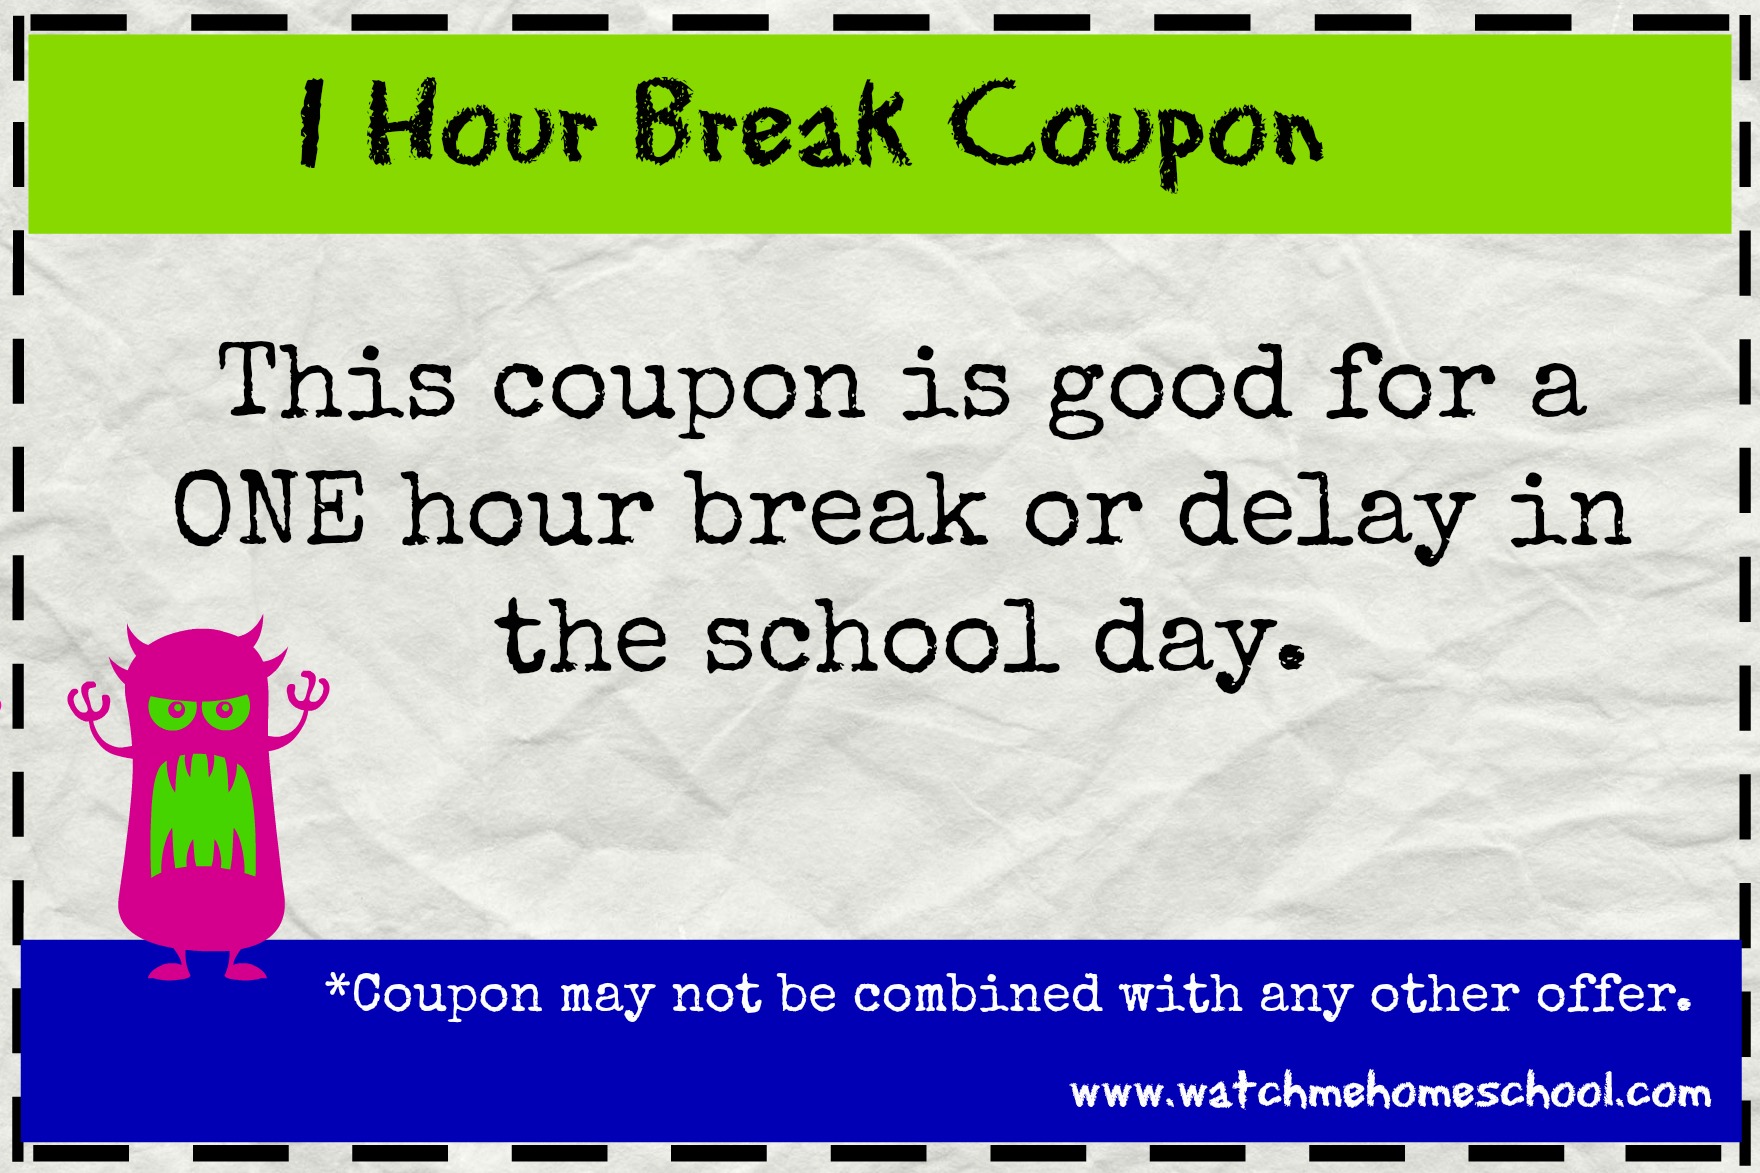 Lunch With Teacher Coupon Fun Coupons For Homeschoolers